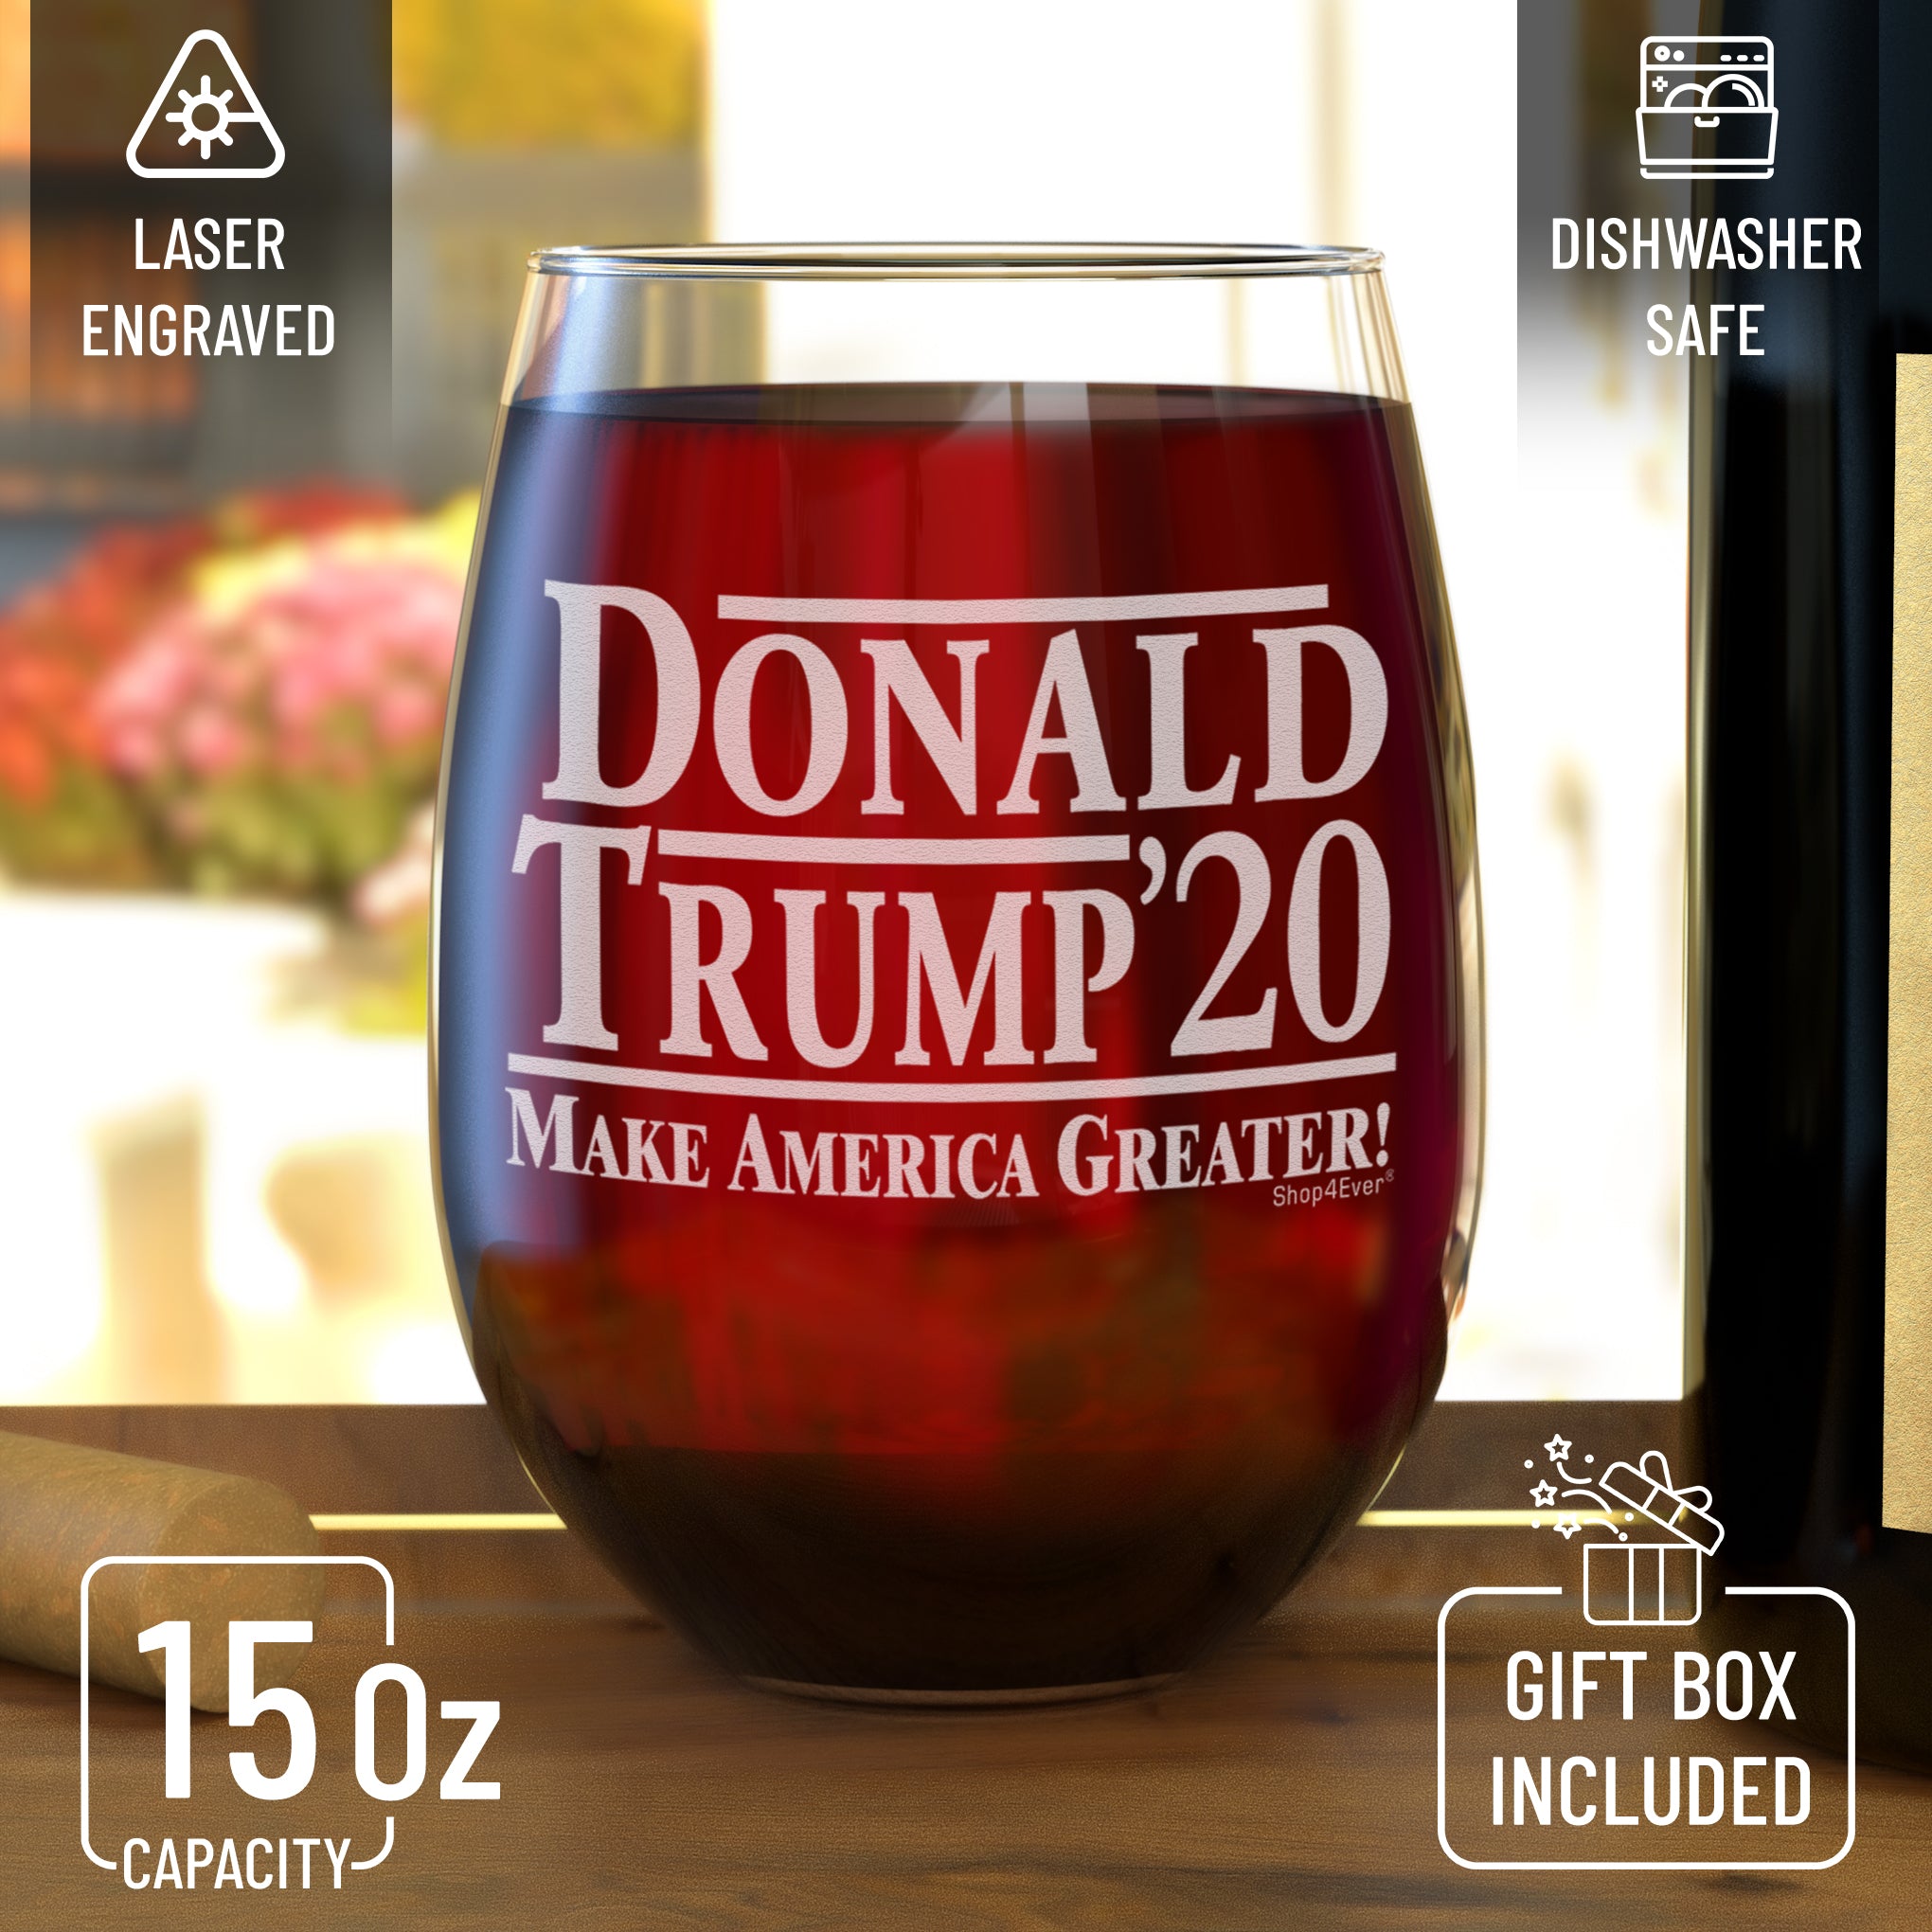 Donald Trump 2020 Make America Greater Laser Engraved Stemless Wine Glass